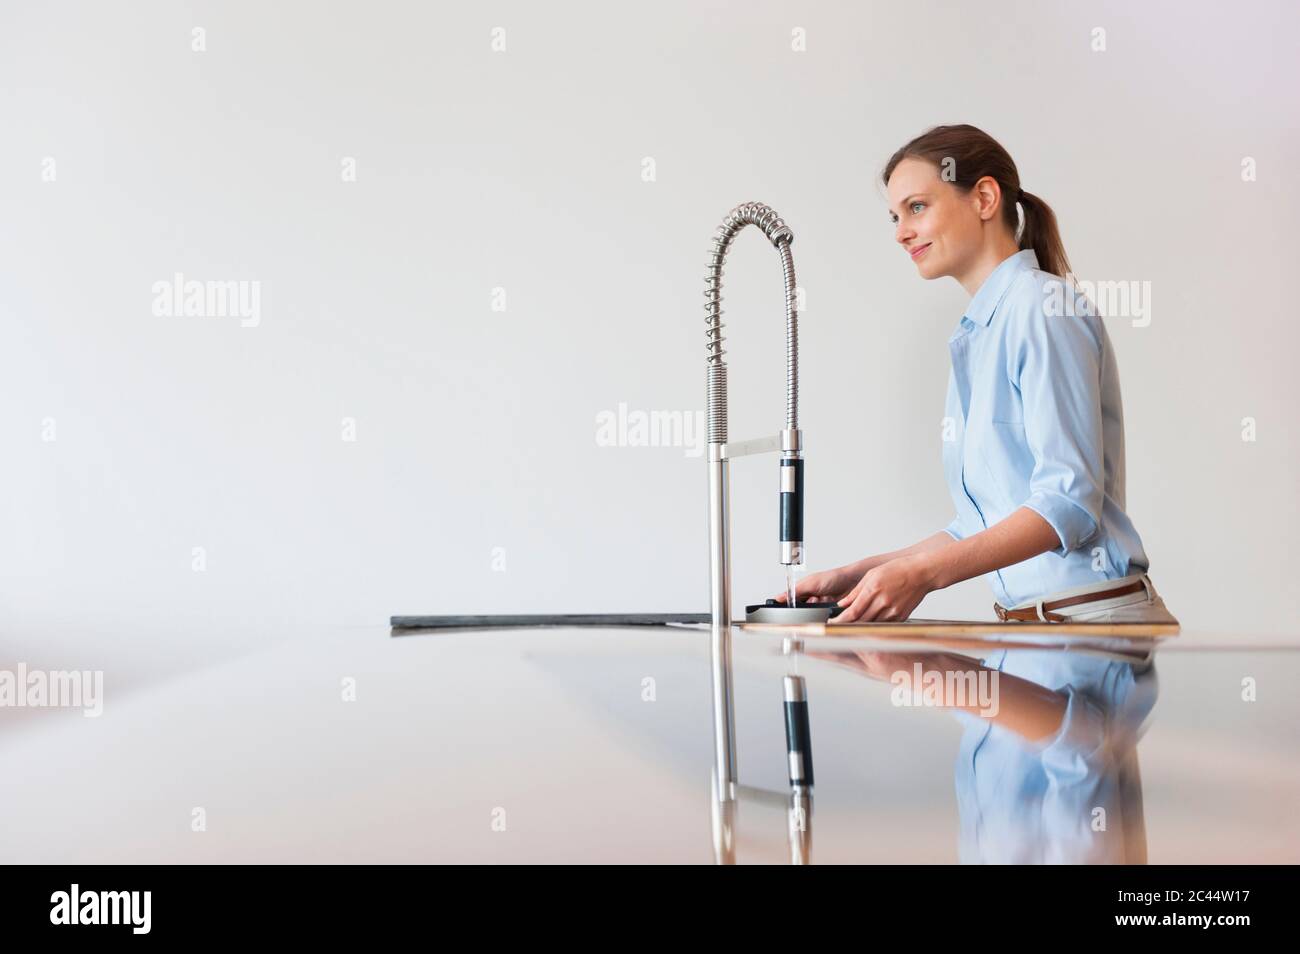 Smiling woman filling water in container through modern kitchen faucet against wall Stock Photo